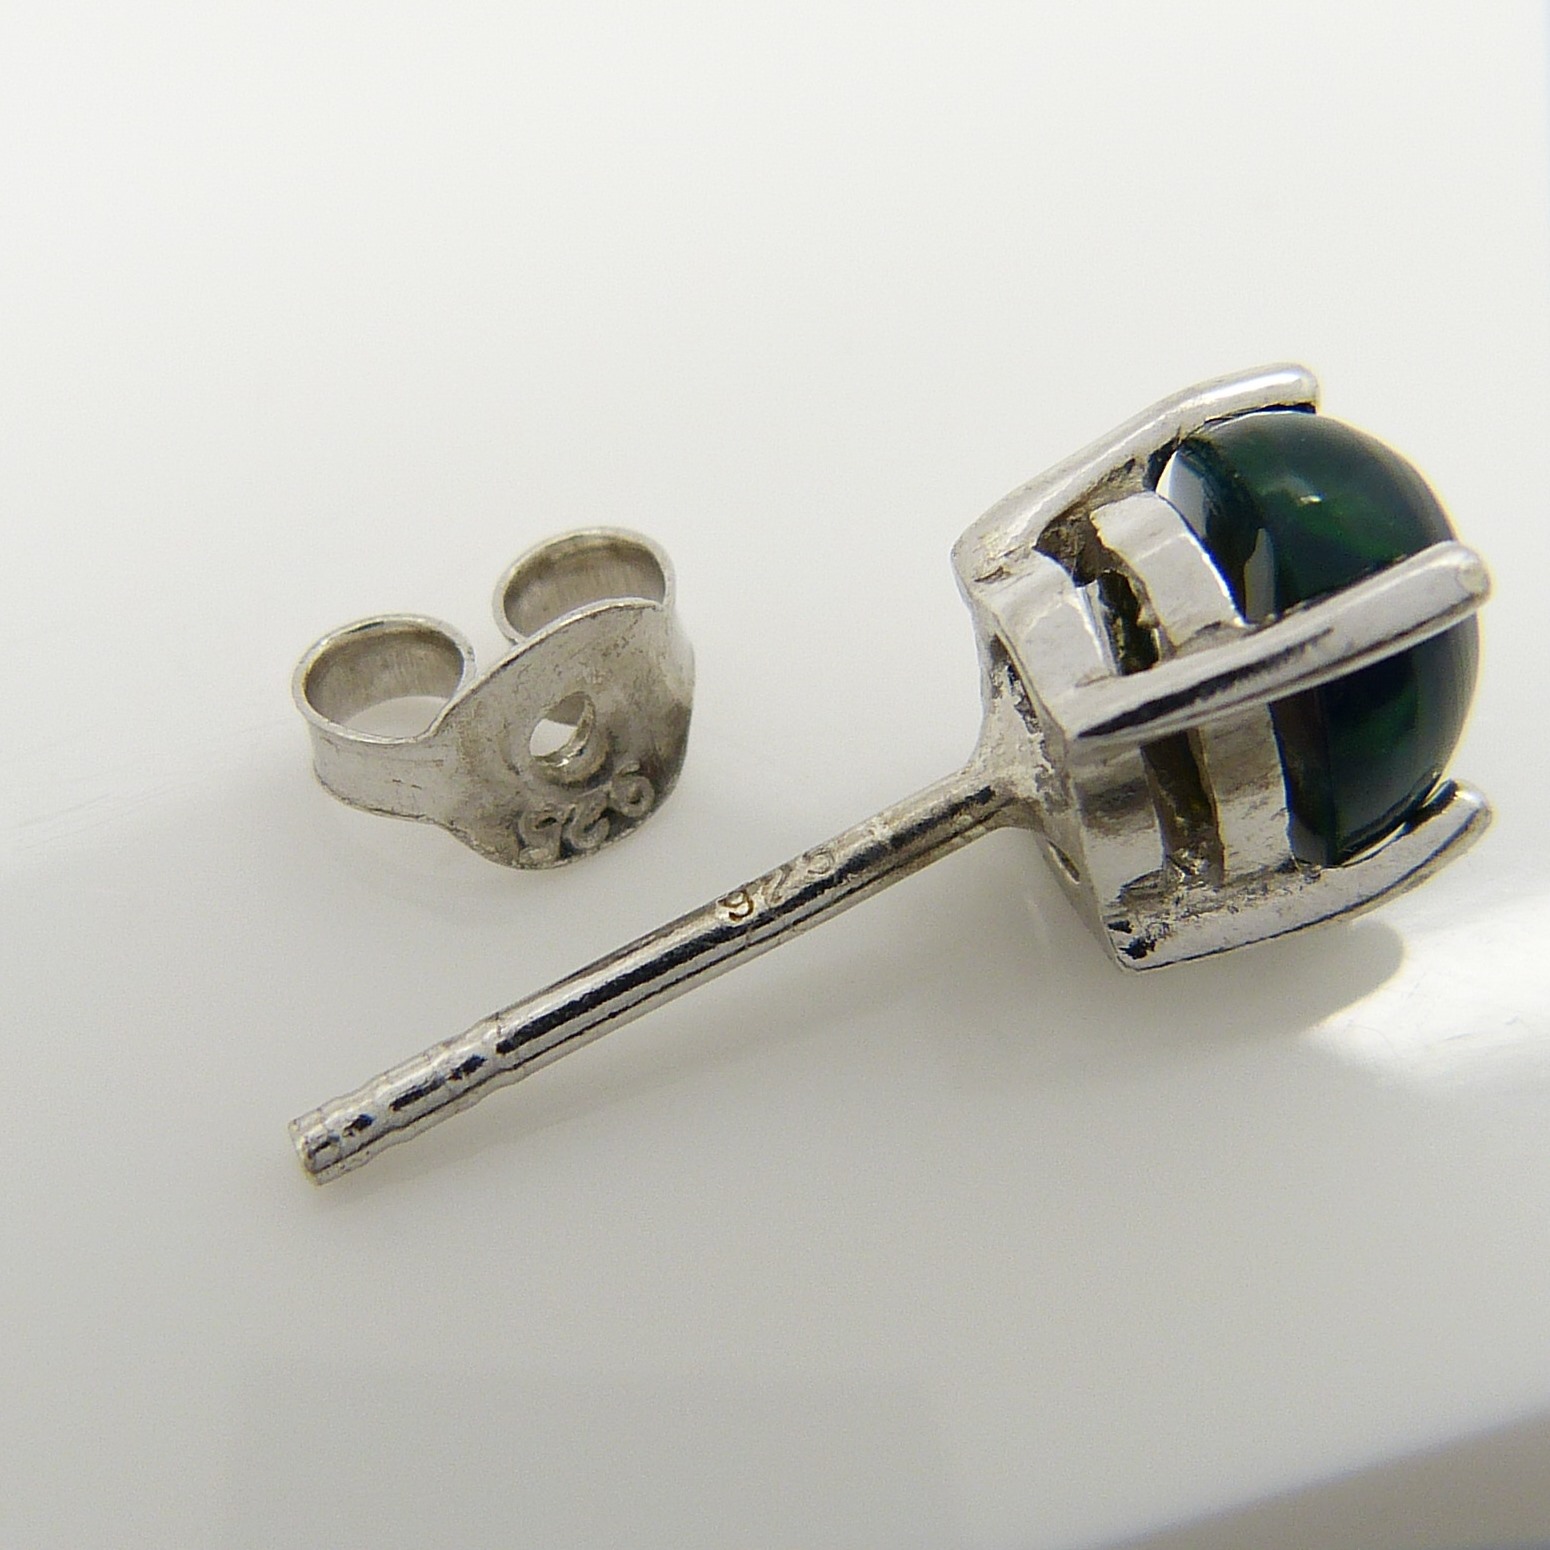 A pair of silver ear studs set with cabochon black Ethiopian opals, 1.10 carats (approx) - Image 5 of 5